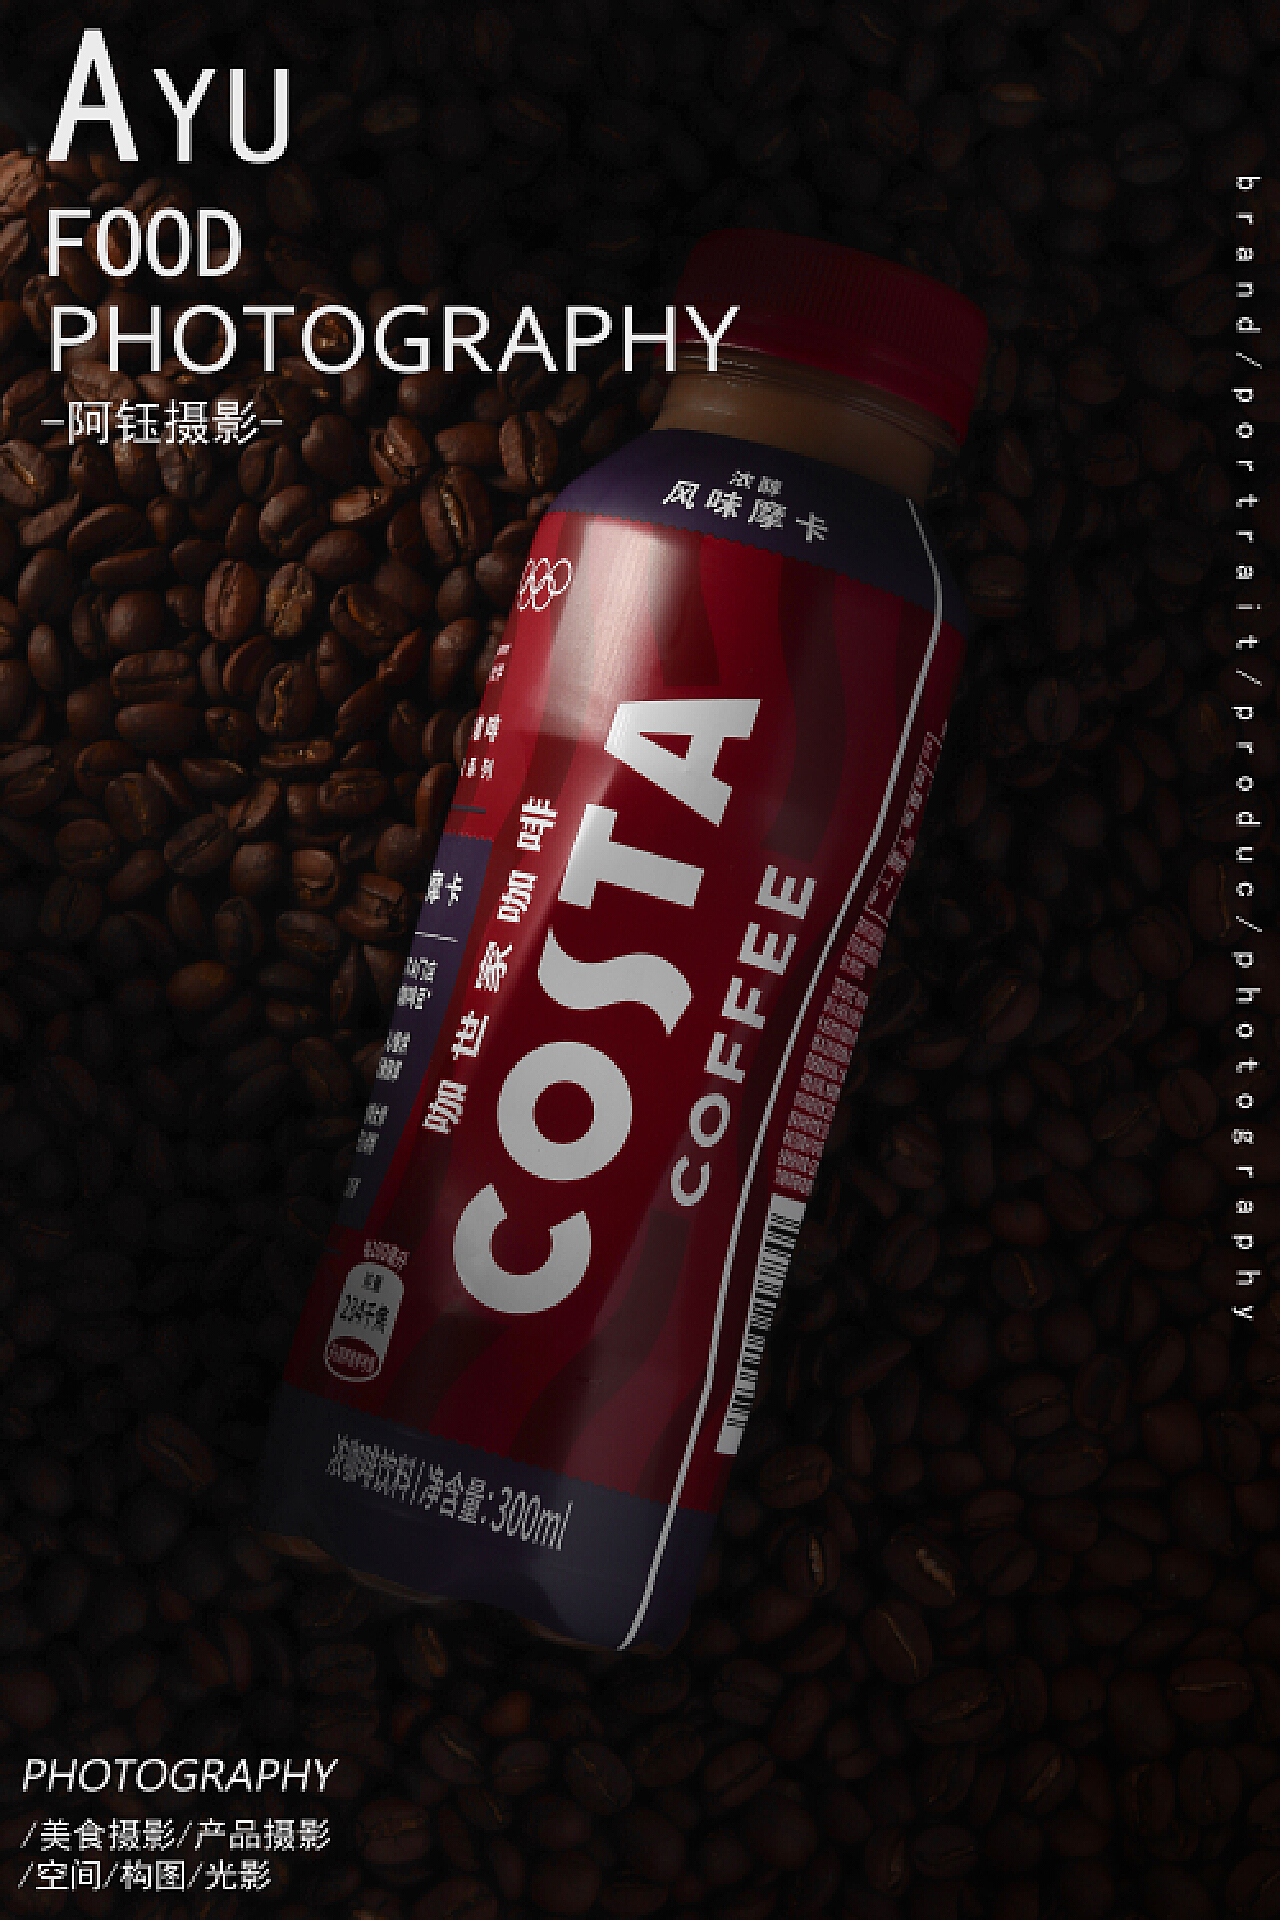 Cold Brew Offers and More from Costa Coffee! | Booky